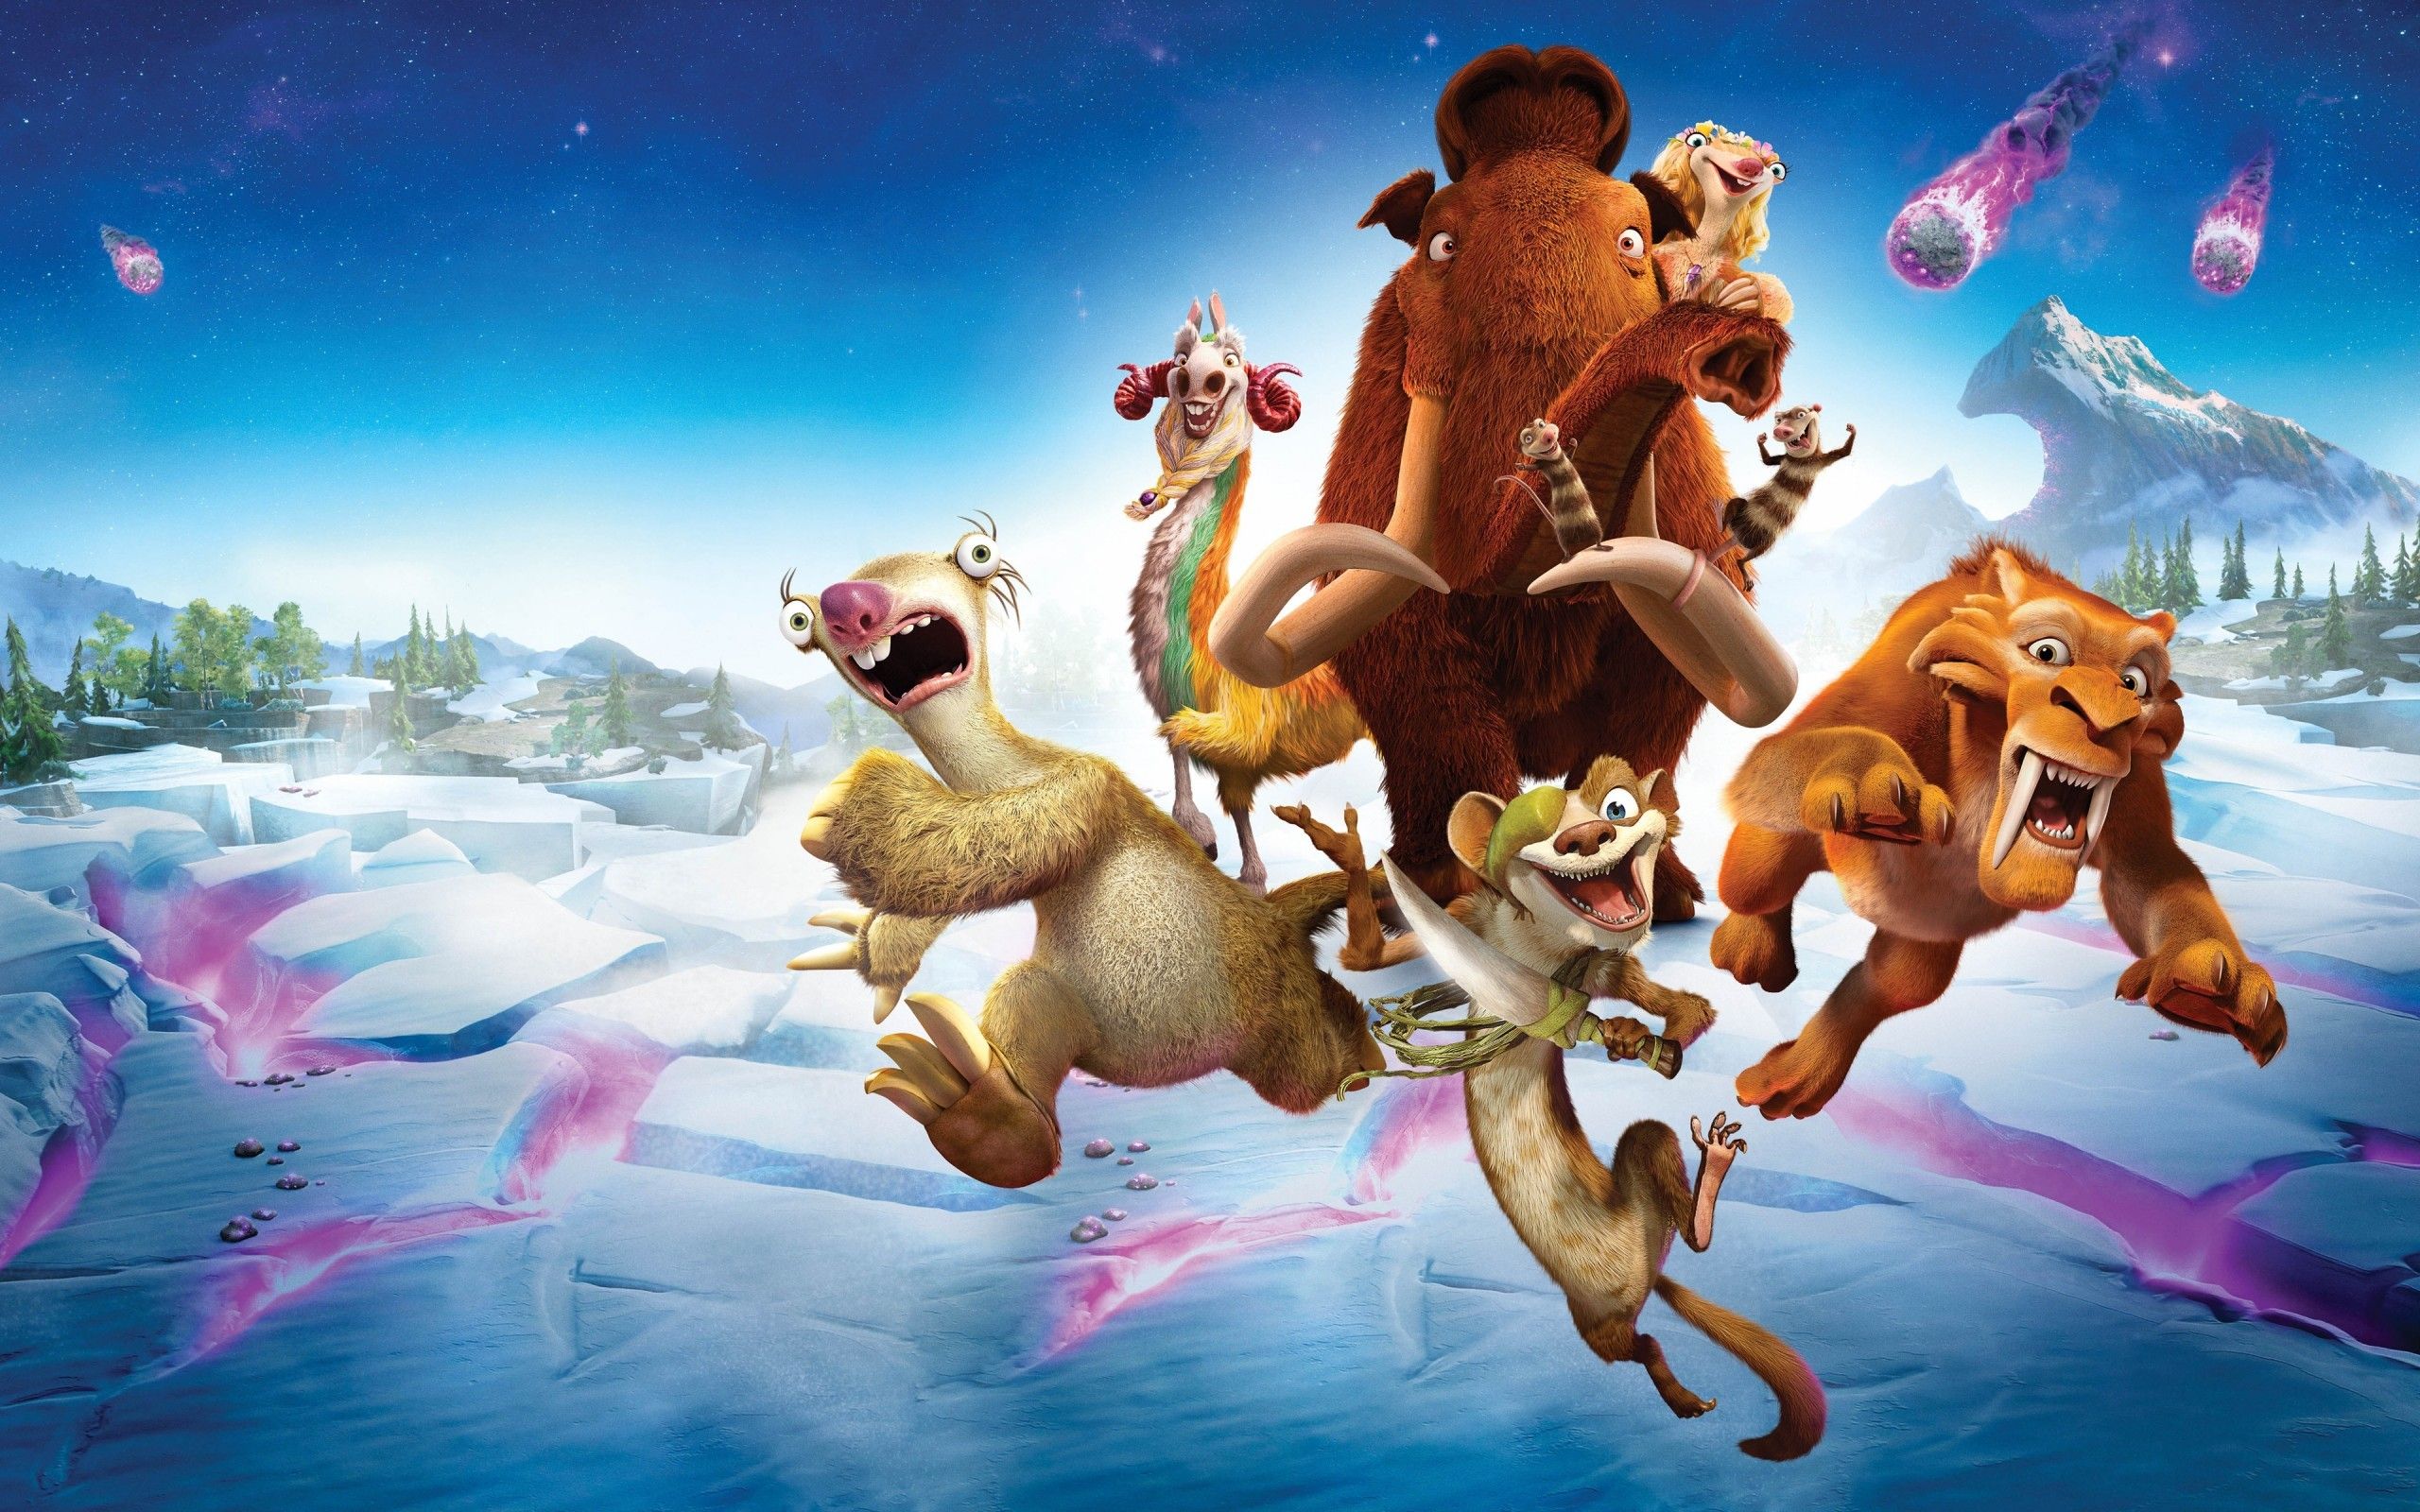 ice age 5 full movie in hindi free download hd